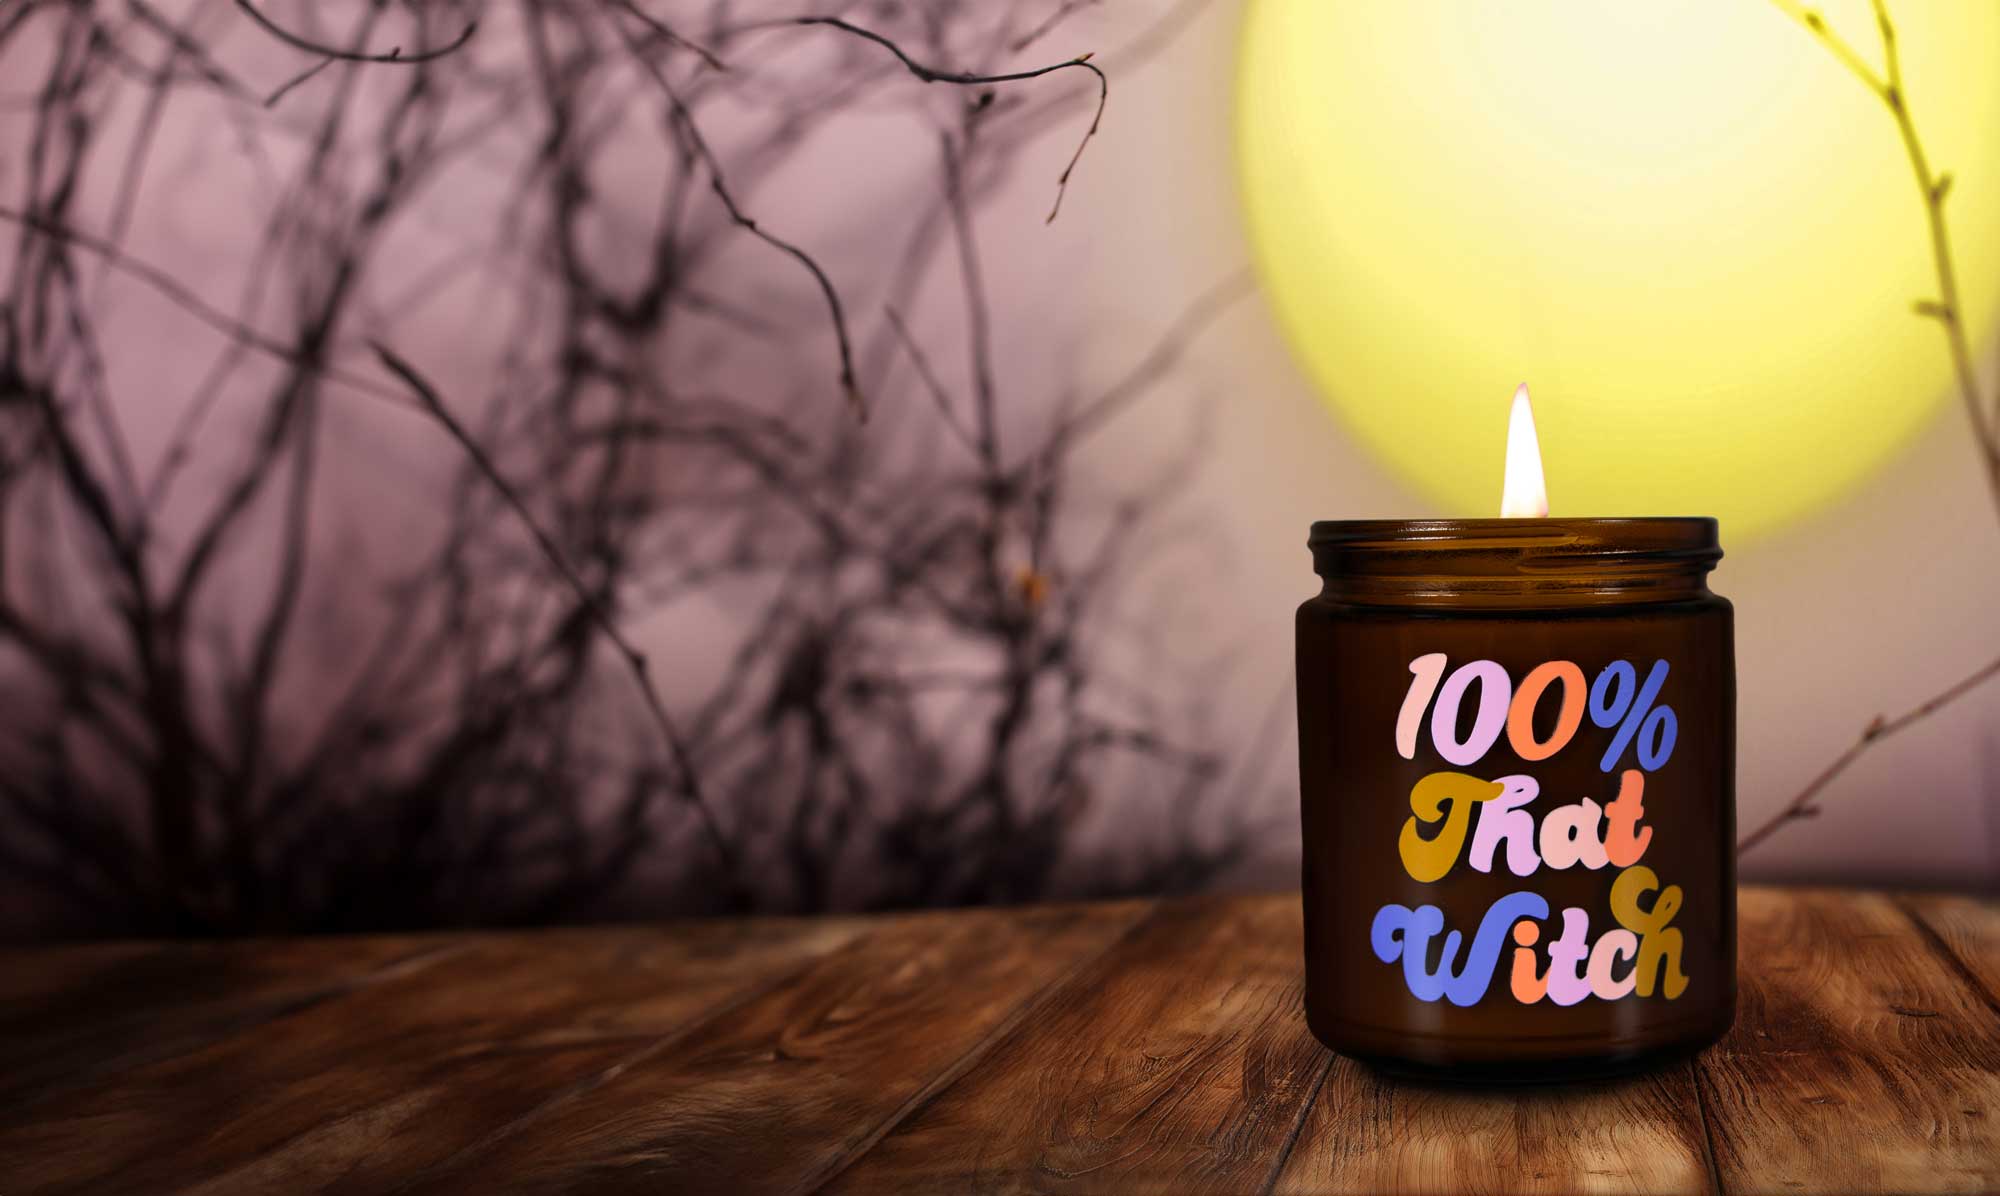 Photo of candle from Confia saying "100% that Witch" and with a composite background showing a full moon and bare branches with a warm glow.